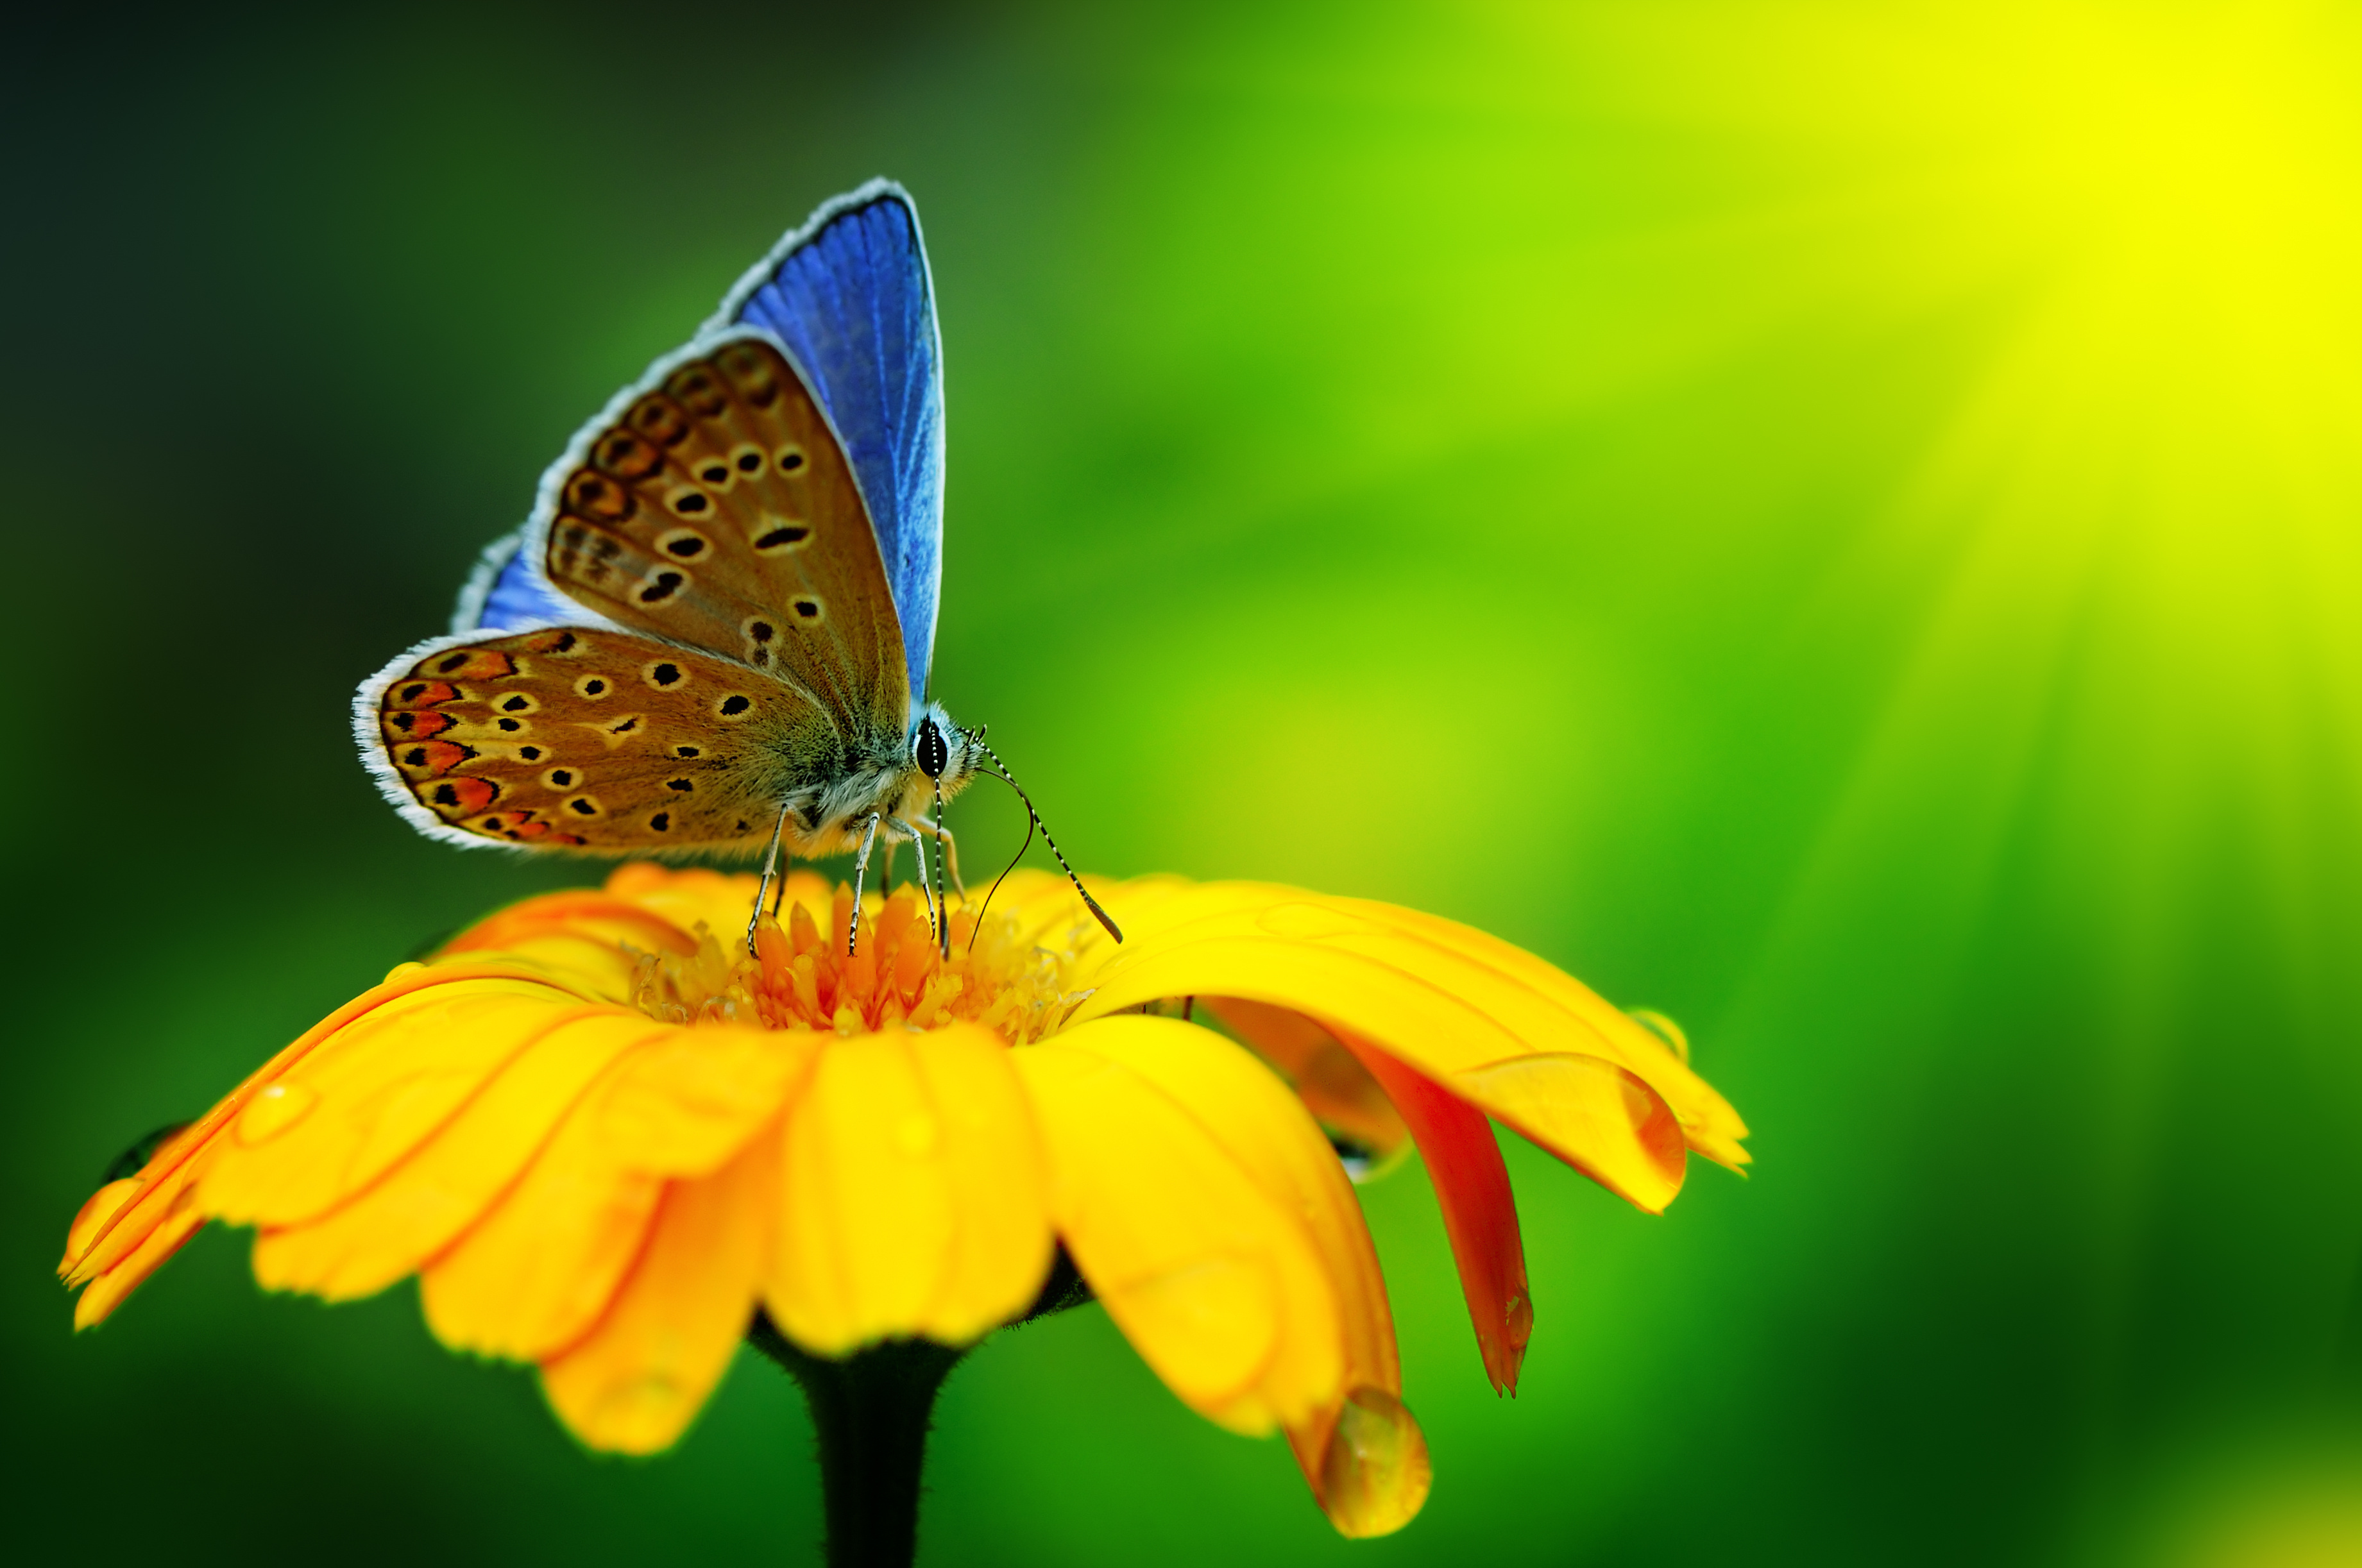 close up, Wallpaper, Butterfly, Insect, Flower, Drops, Yellow, Green, Brigh Wallpaper